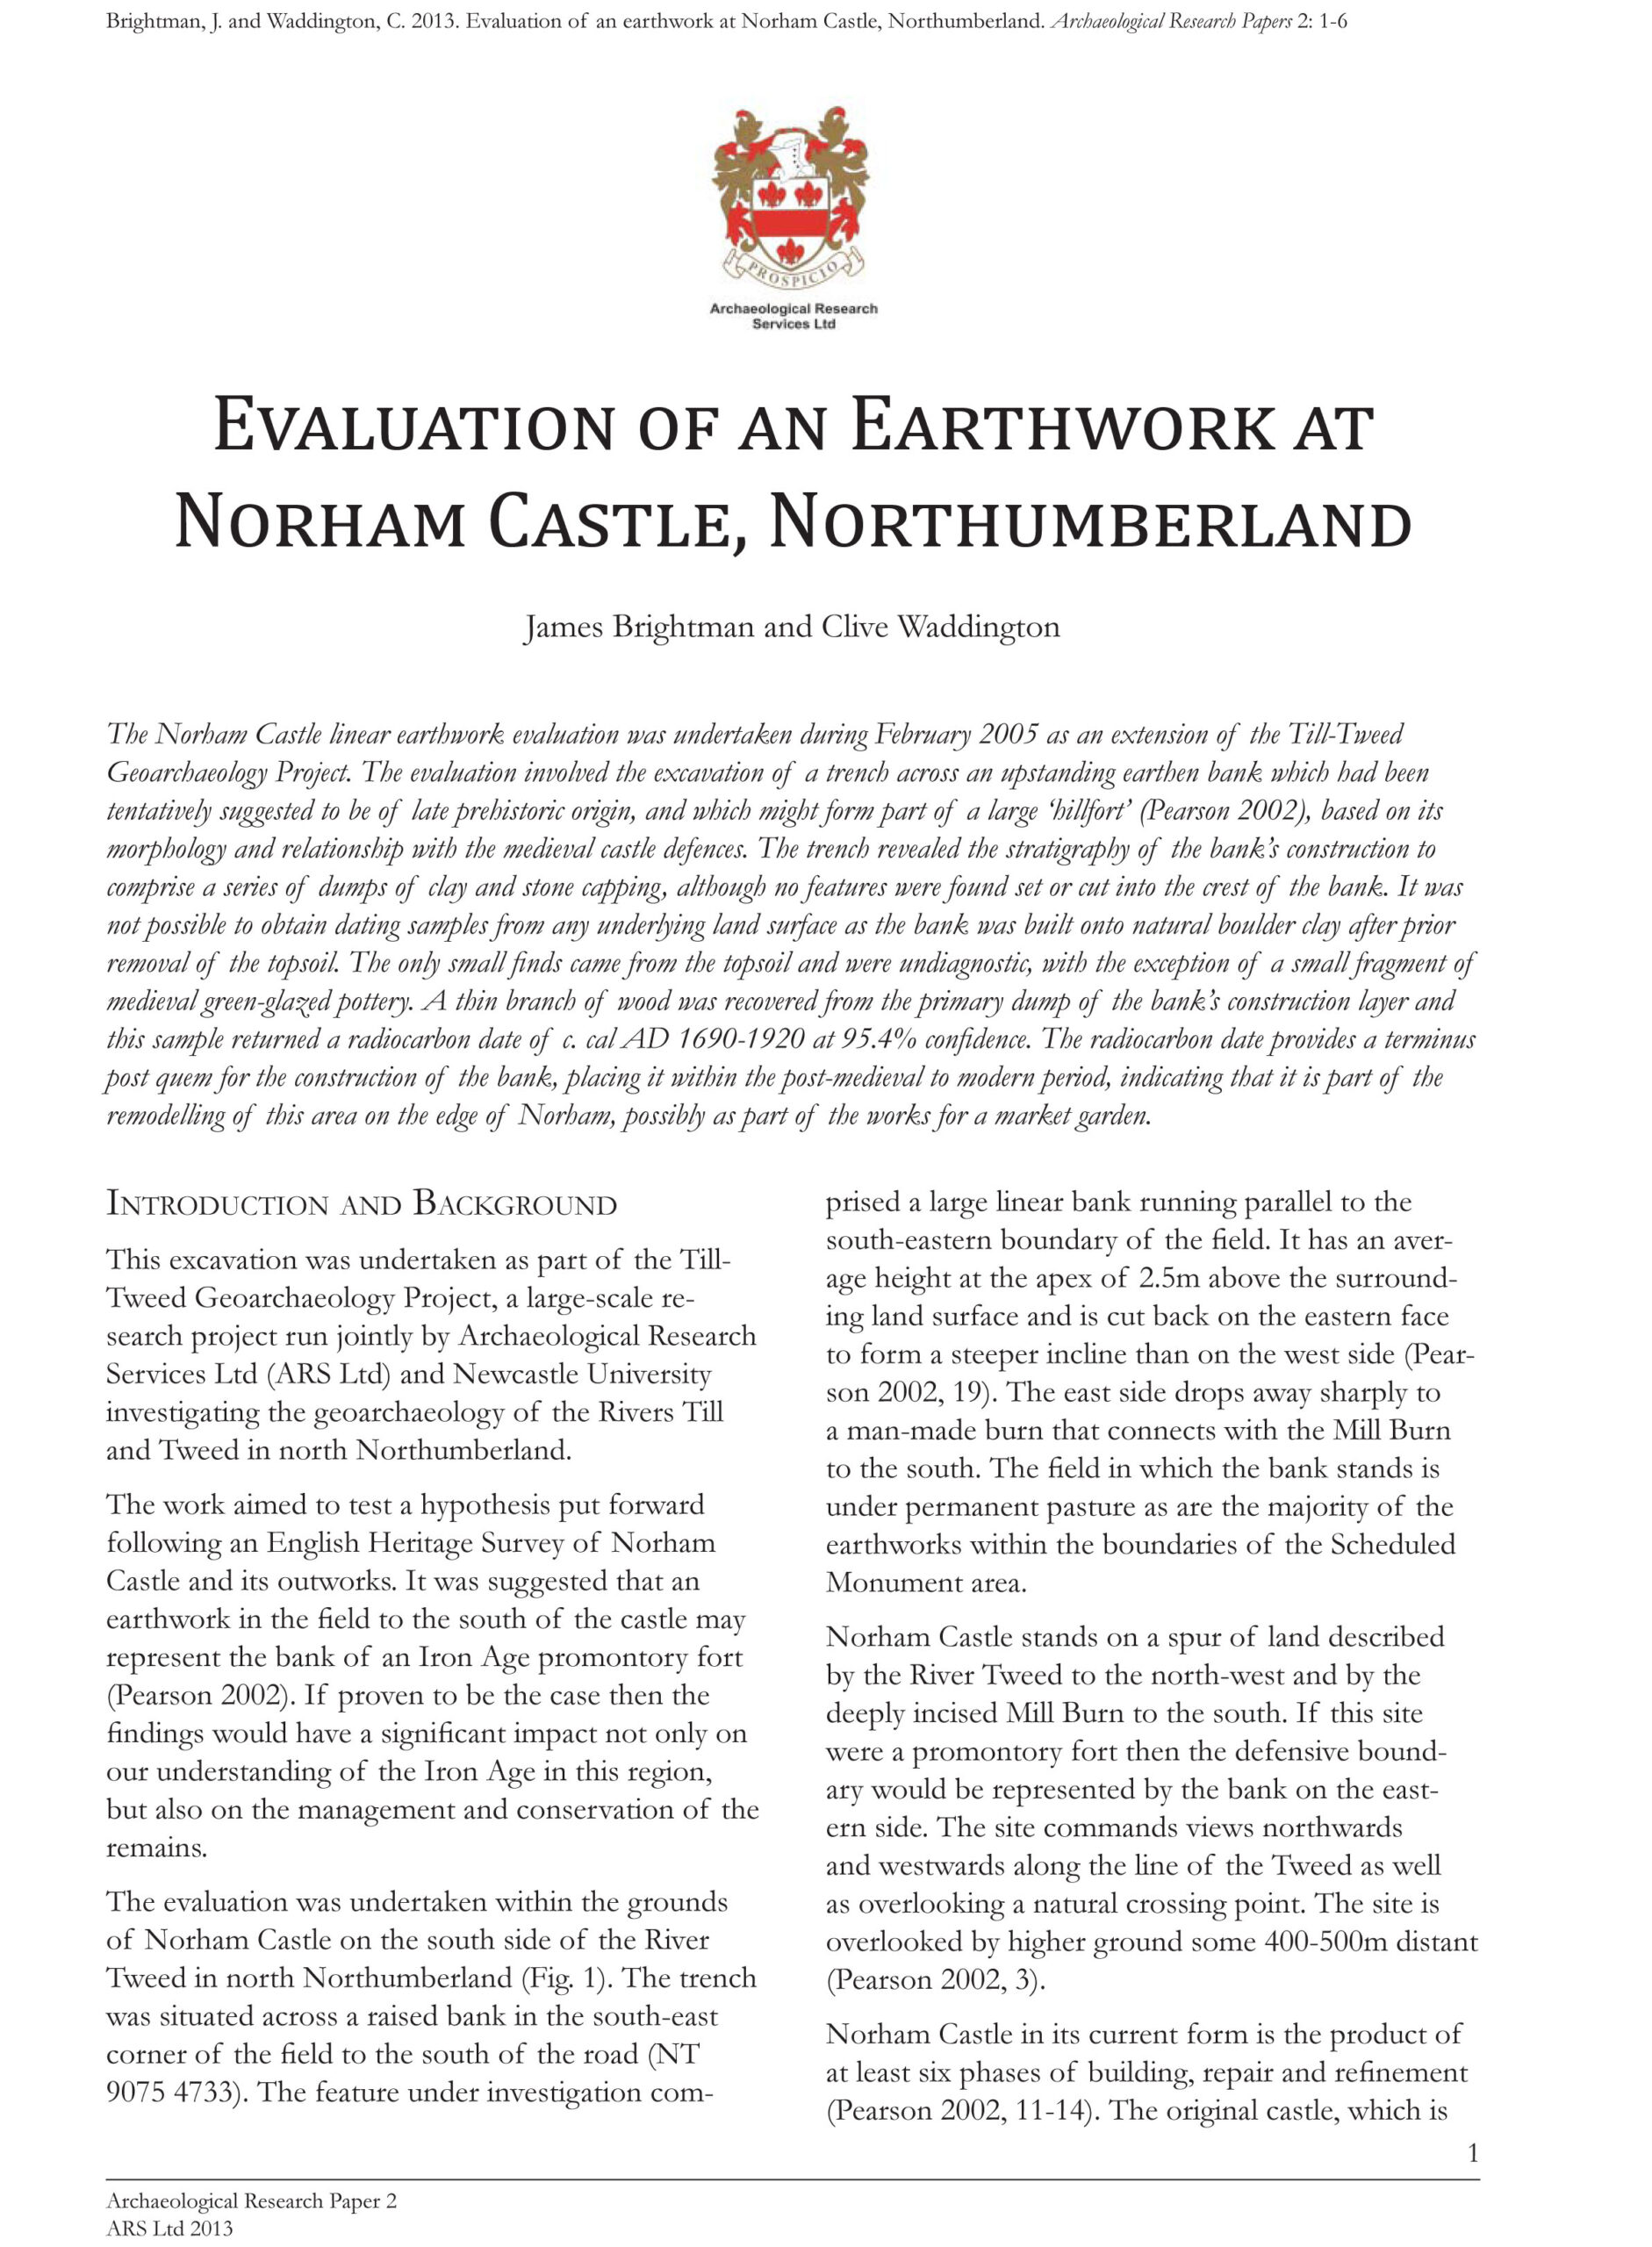 Evaluation of an Earthwork at Norham Castle